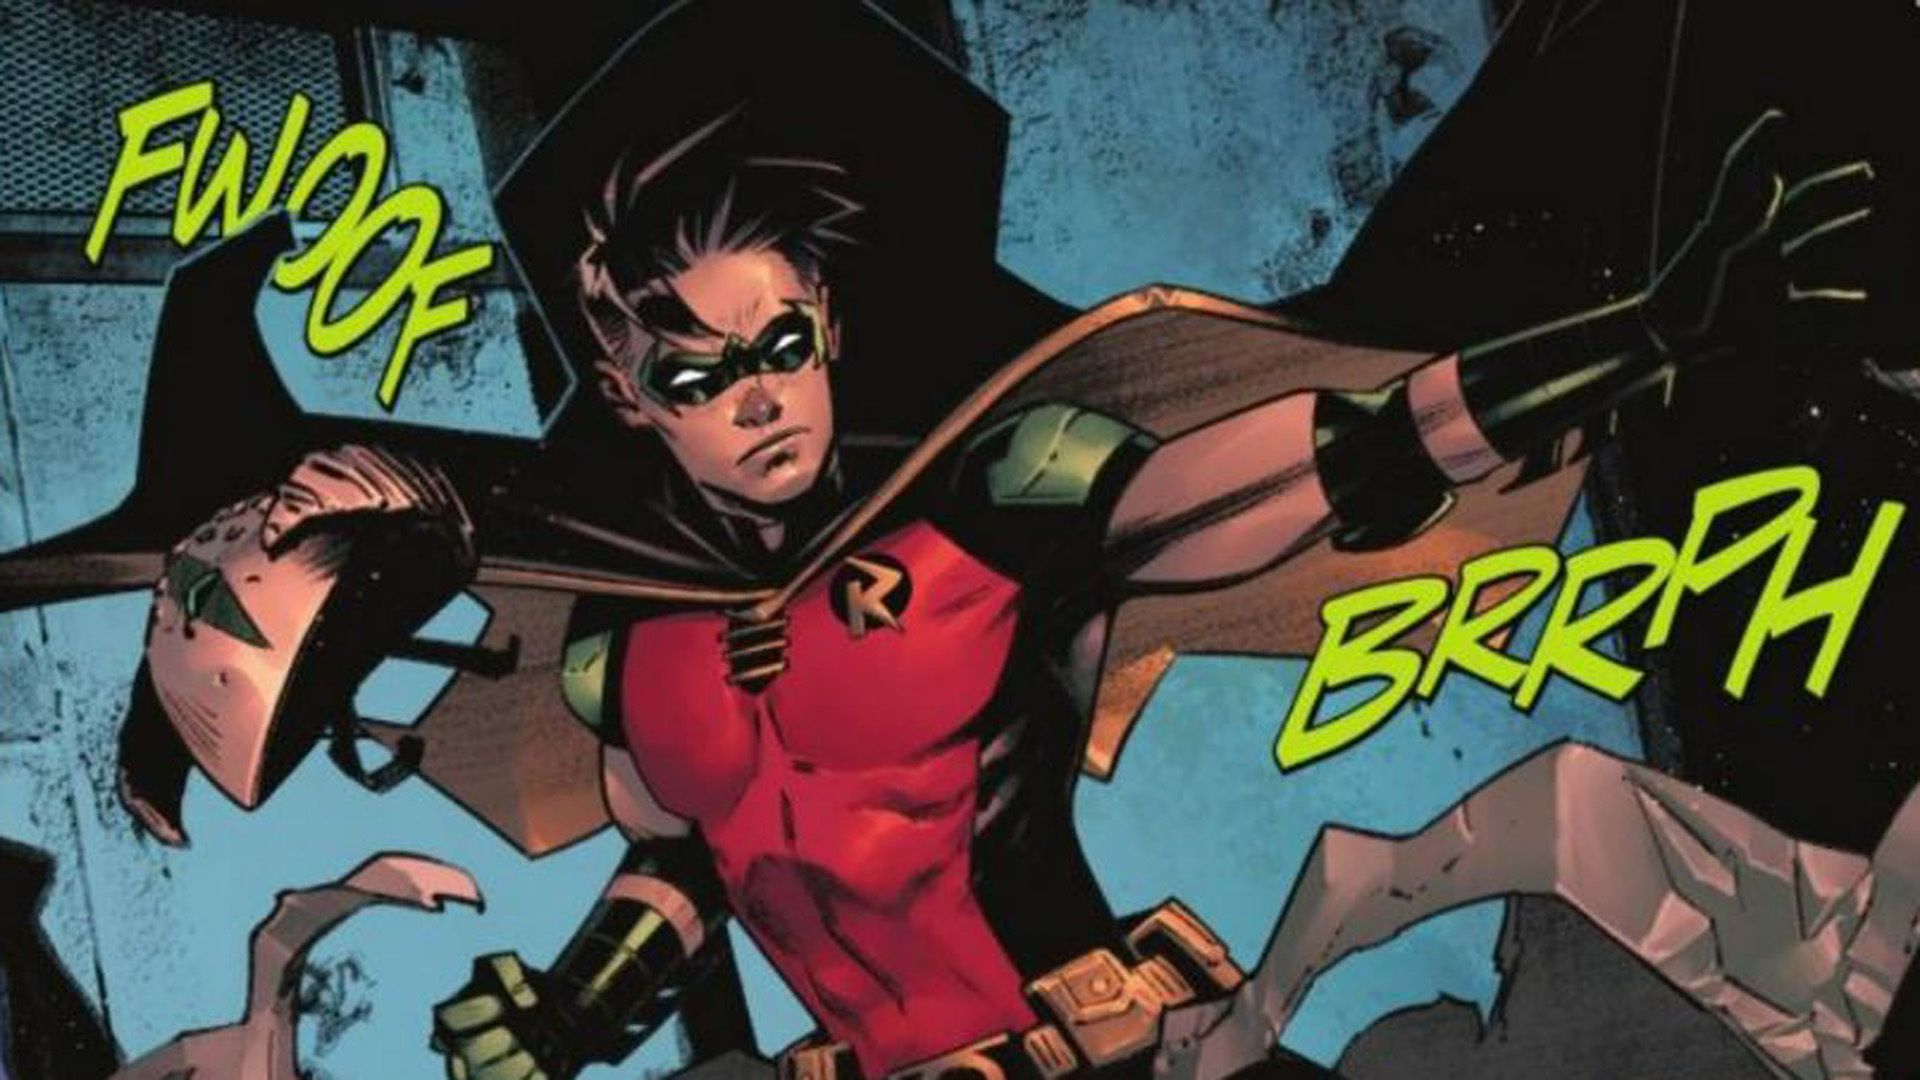 2. Tim Drake He was popularly called the best Robin. Tim wanted to be Robin and assist Batman, so he did. He founded Young Justice and led that group before joining the Teen Titans. Tim never needed them because he was always better than the rest. Once he left, he never went back to the group.